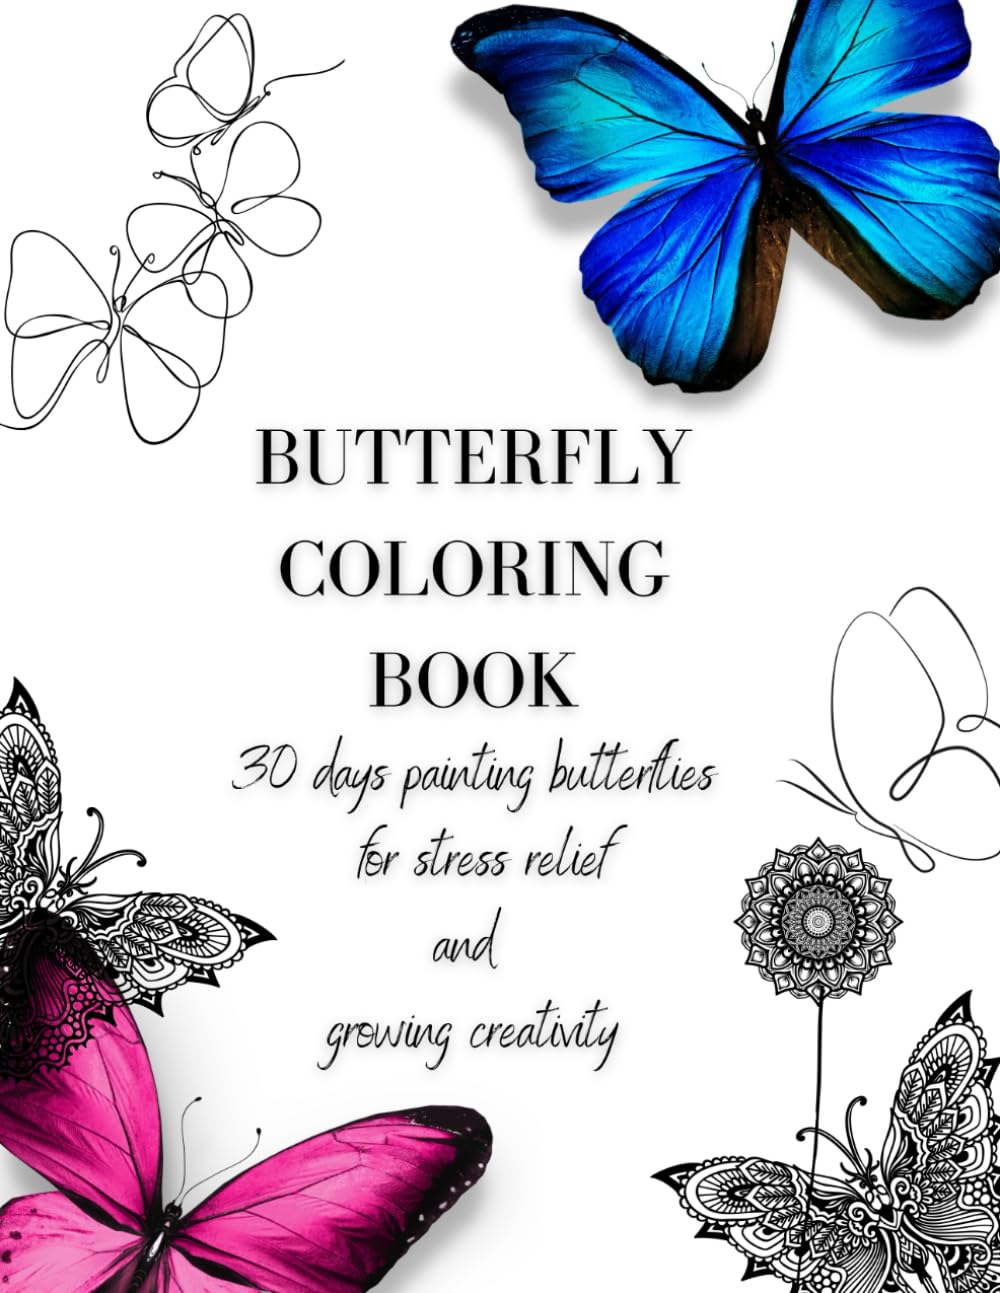 BUTTERFLY COLORING BOOK: 30 Days Painting Butterflies for Stress Relief and Growing Creativity